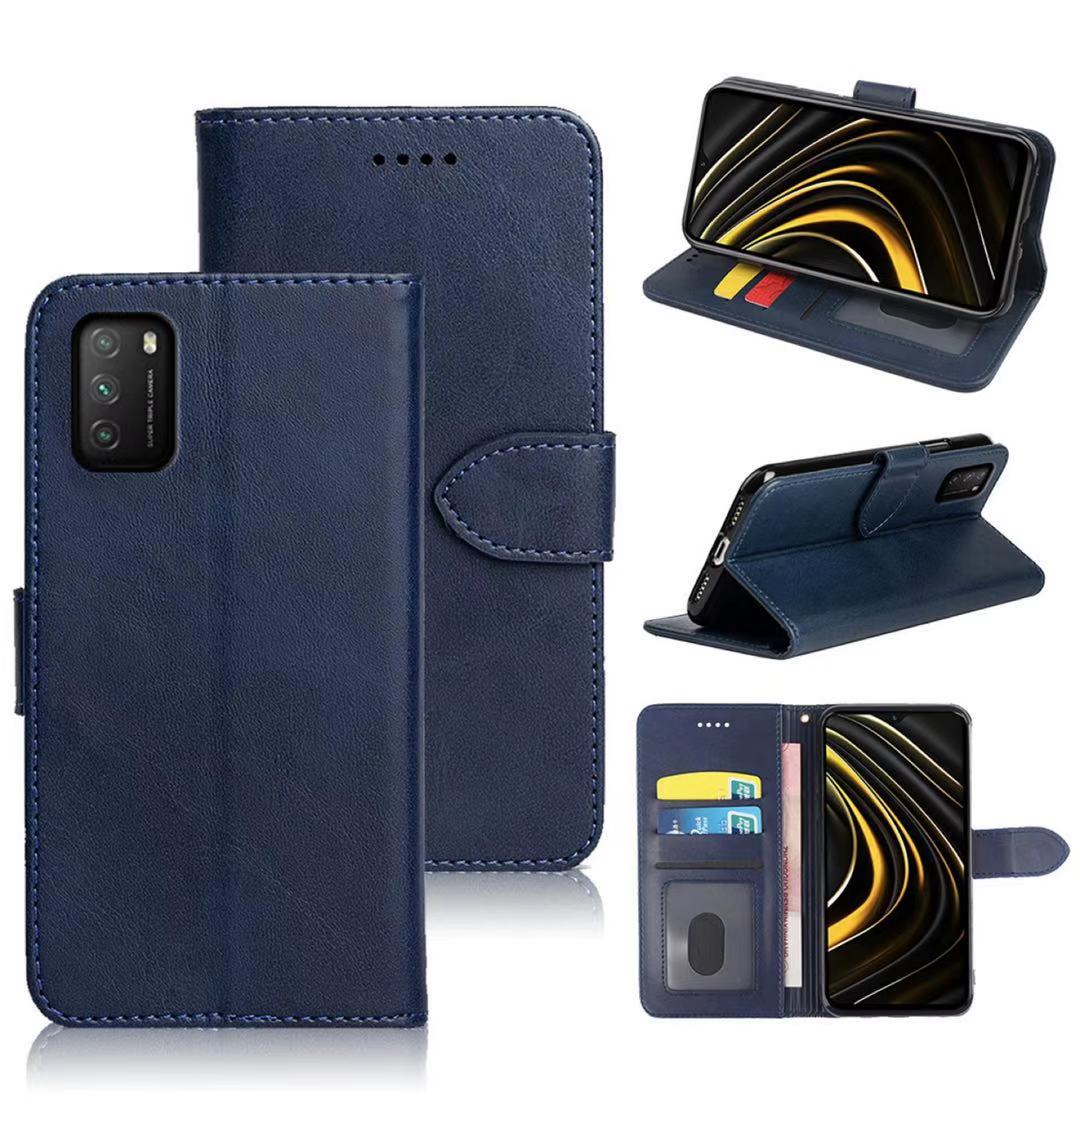 Bakeey-for-POCO-M3-Case-Magnetic-Flip-with-Multi-Card-Slots-Wallet-Stand-PU-Leather-Full-Body-Cover--1805309-1